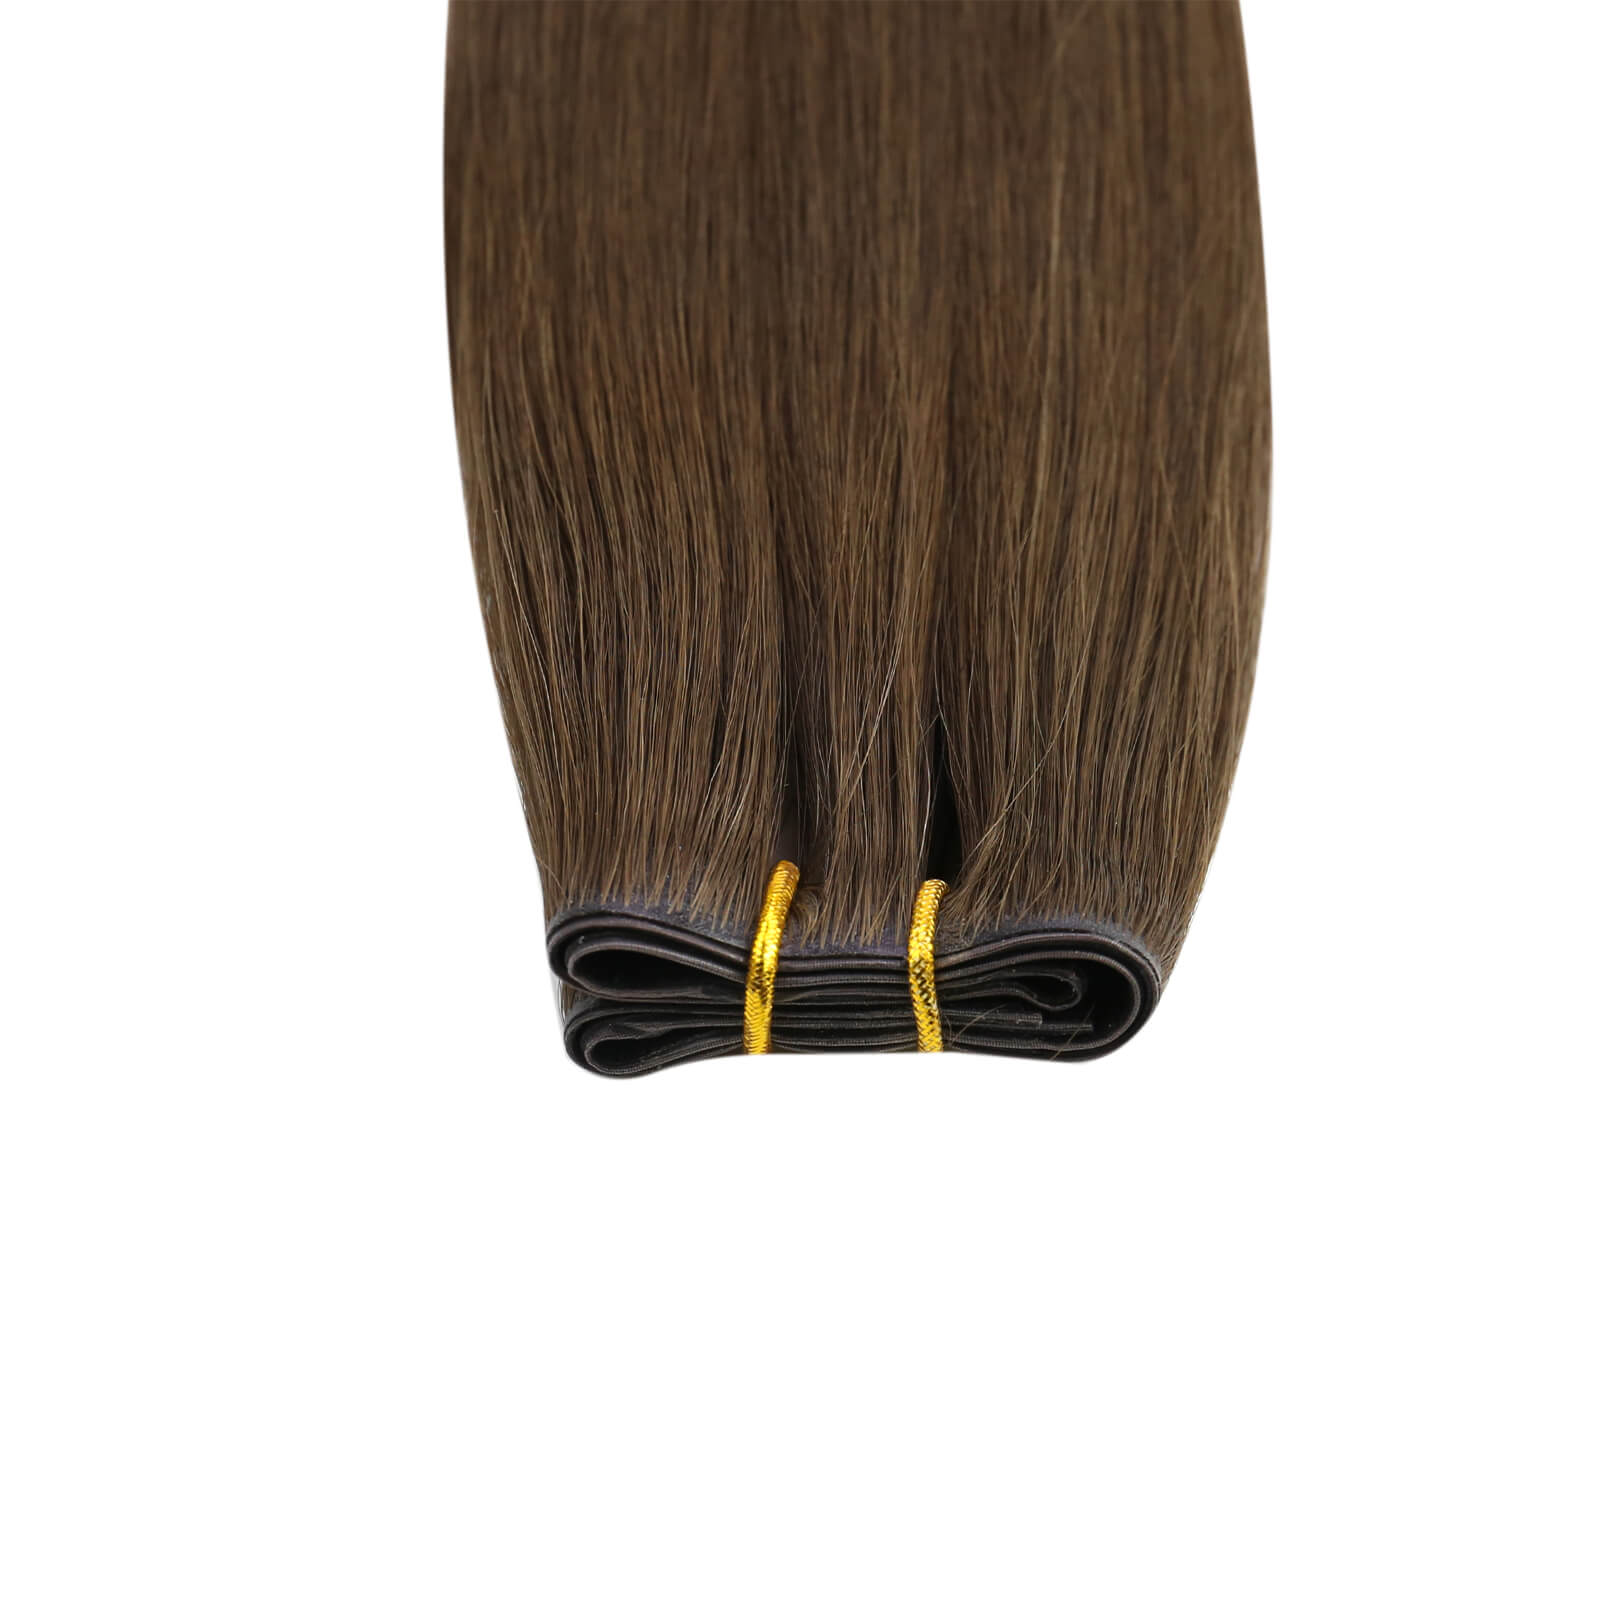 pu hloe invisible weft,best hair extensions,weft hair,sew in weft hair extensions,pu invisible weft hair,xo weft hair,hair extensions,weft hair,hair weft,human hair